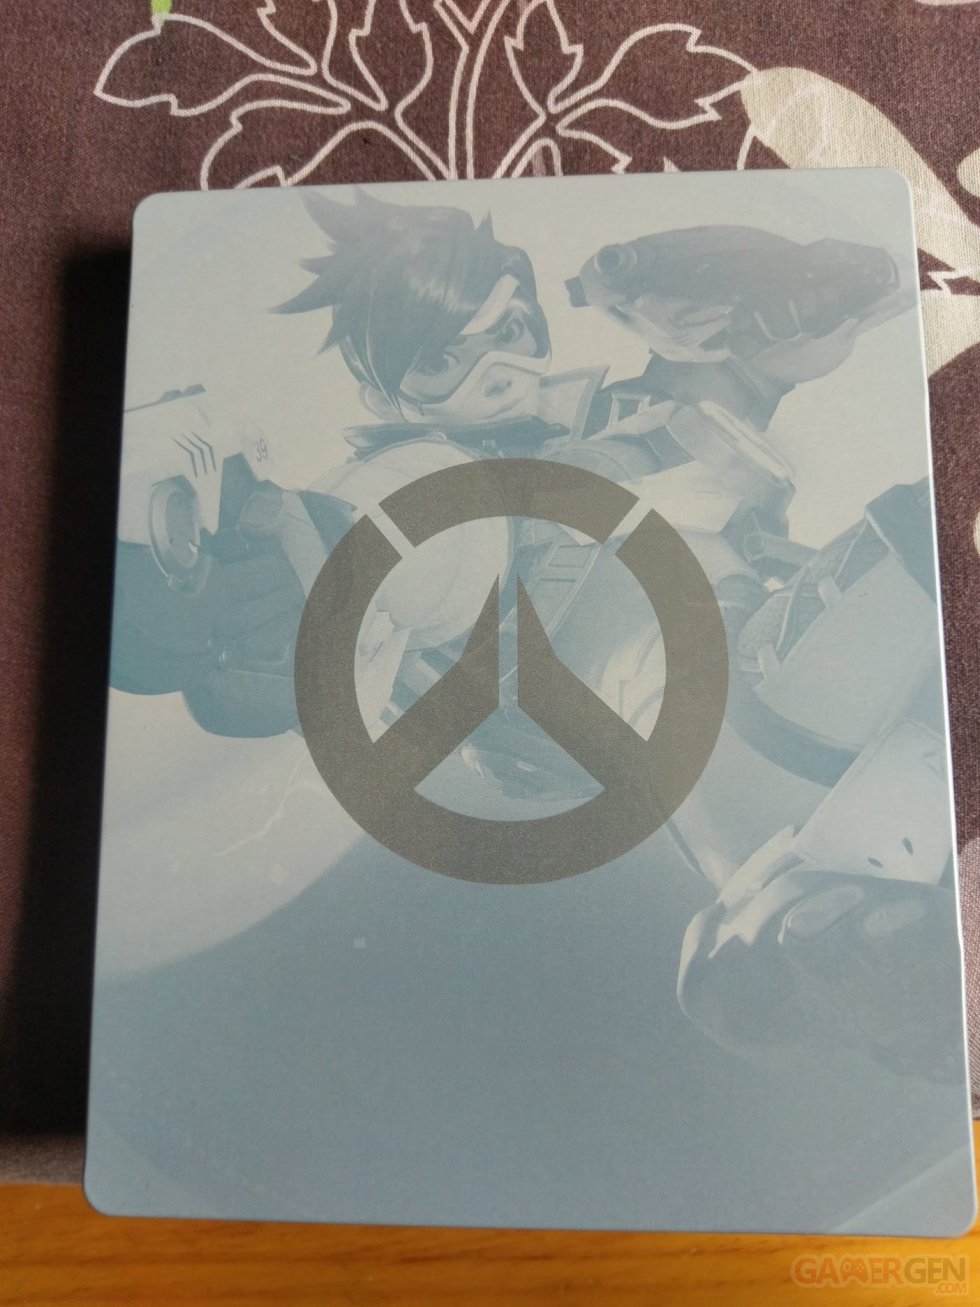 Overwatch Edition Collector Unboxing Photos Images (c)DroidXAce (13)